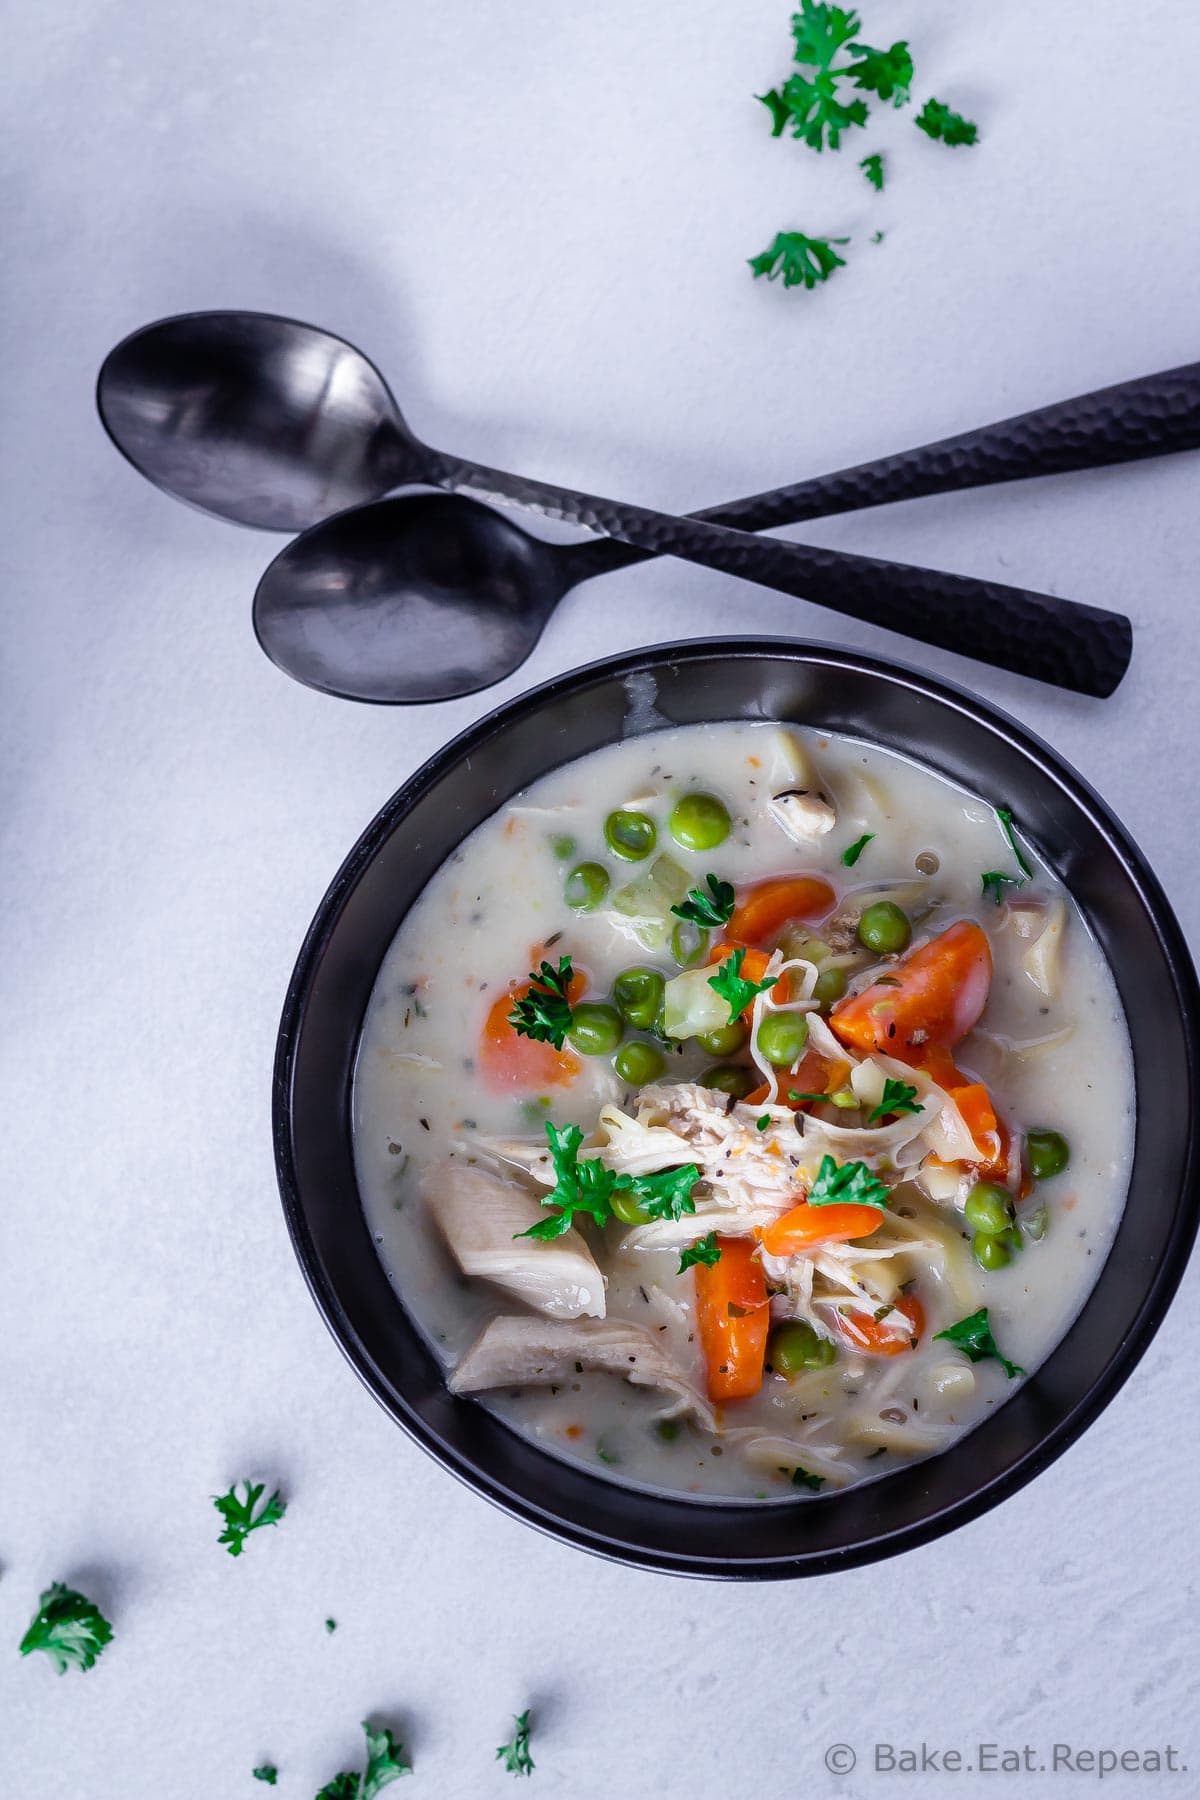 Creamy Chicken Noodle Soup - Sally's Baking Addiction